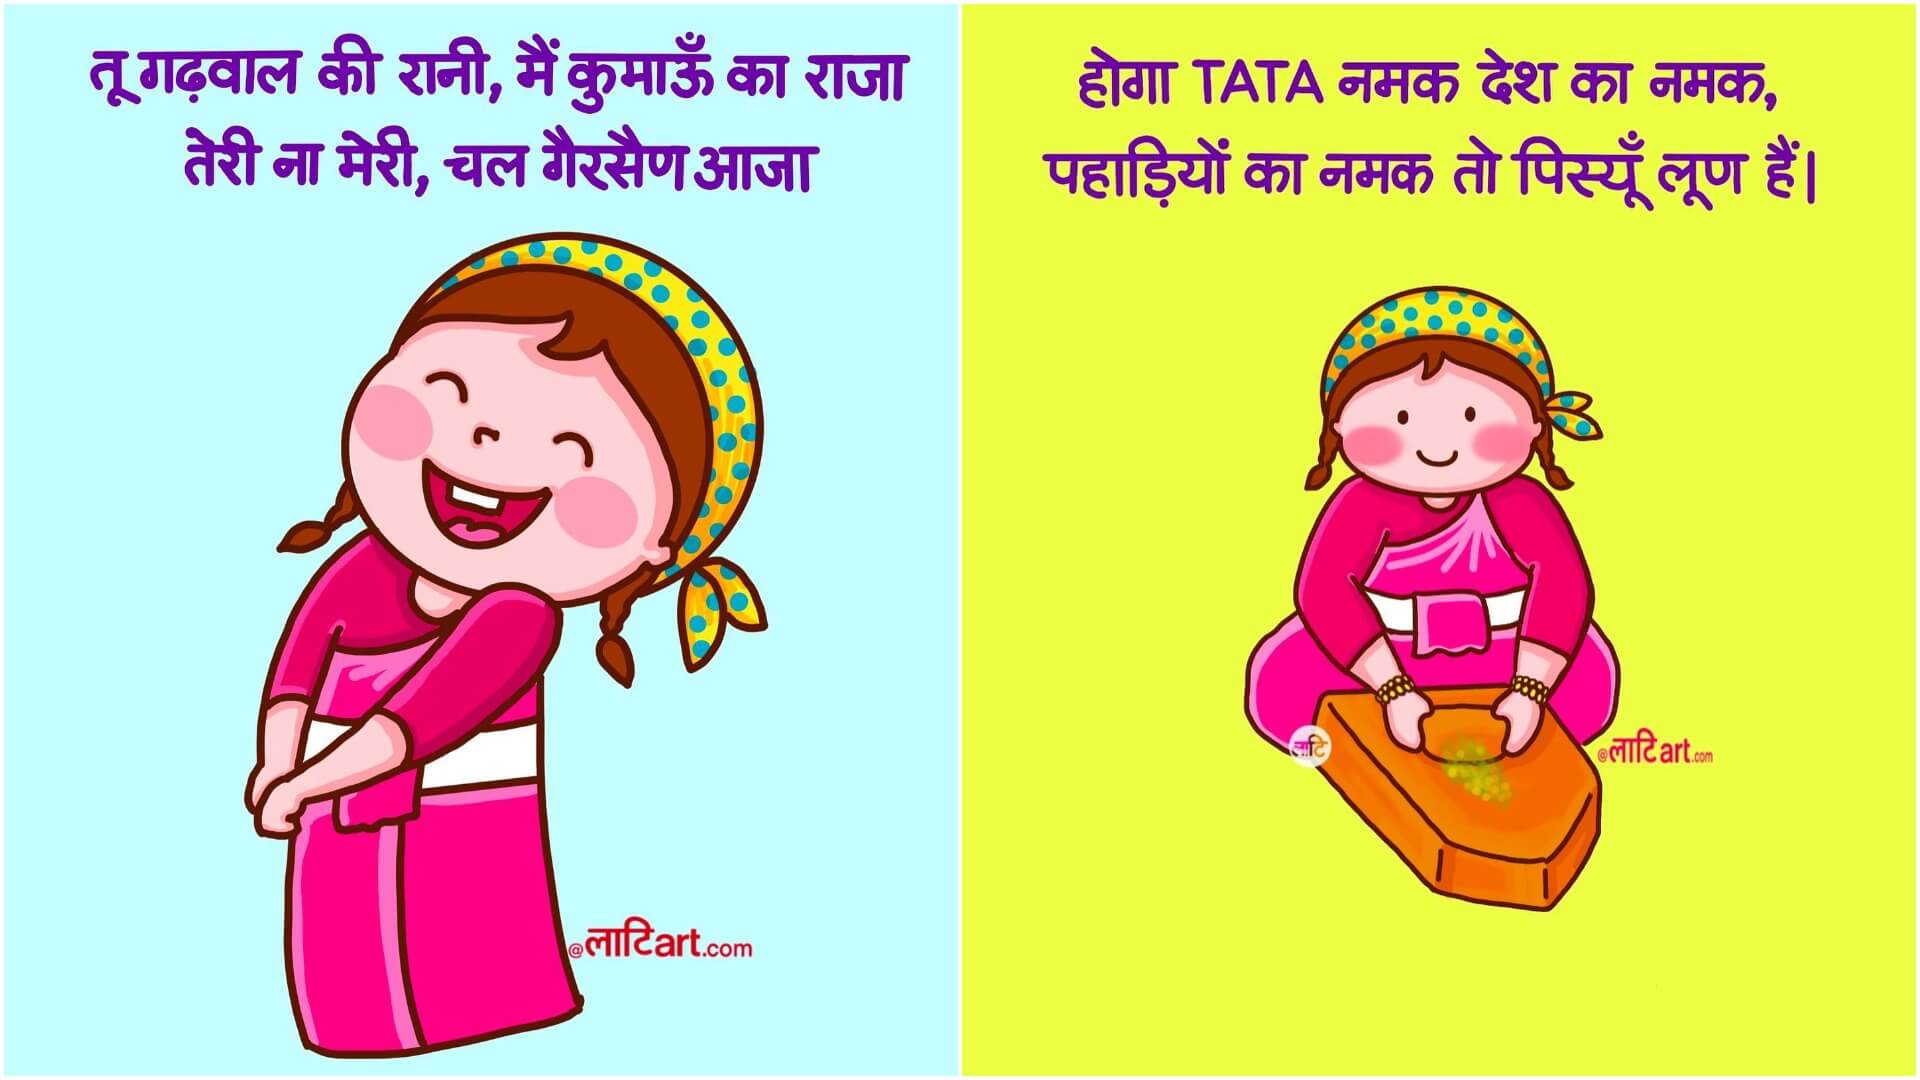 Pahadi Cartoons By This Uttarakhand Artist Shed Light On Their Culture In  The Cutest Way